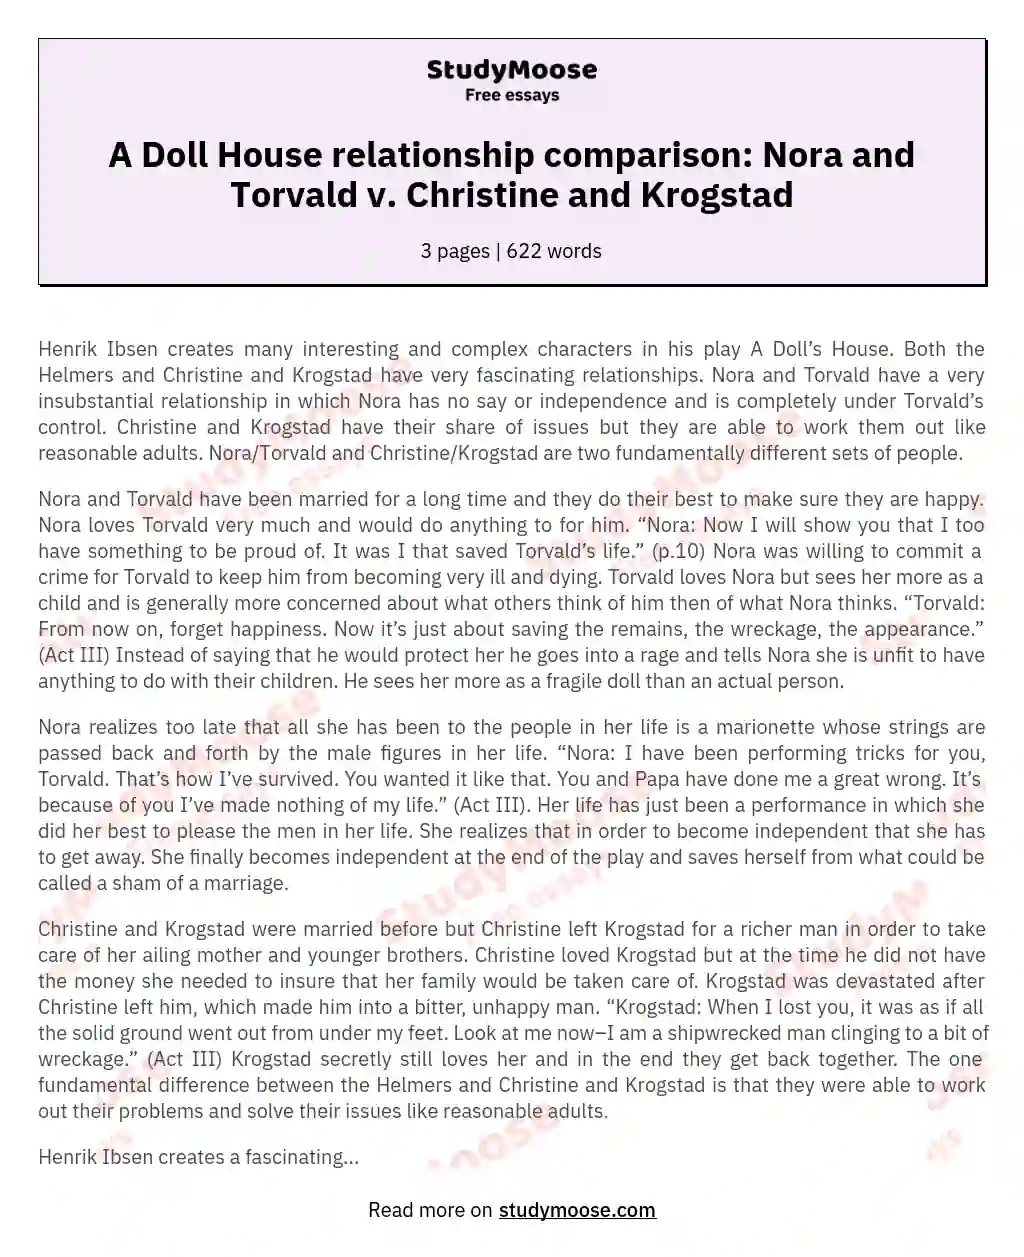 A Doll House relationship comparison: Nora and Torvald v. Christine and Krogstad essay